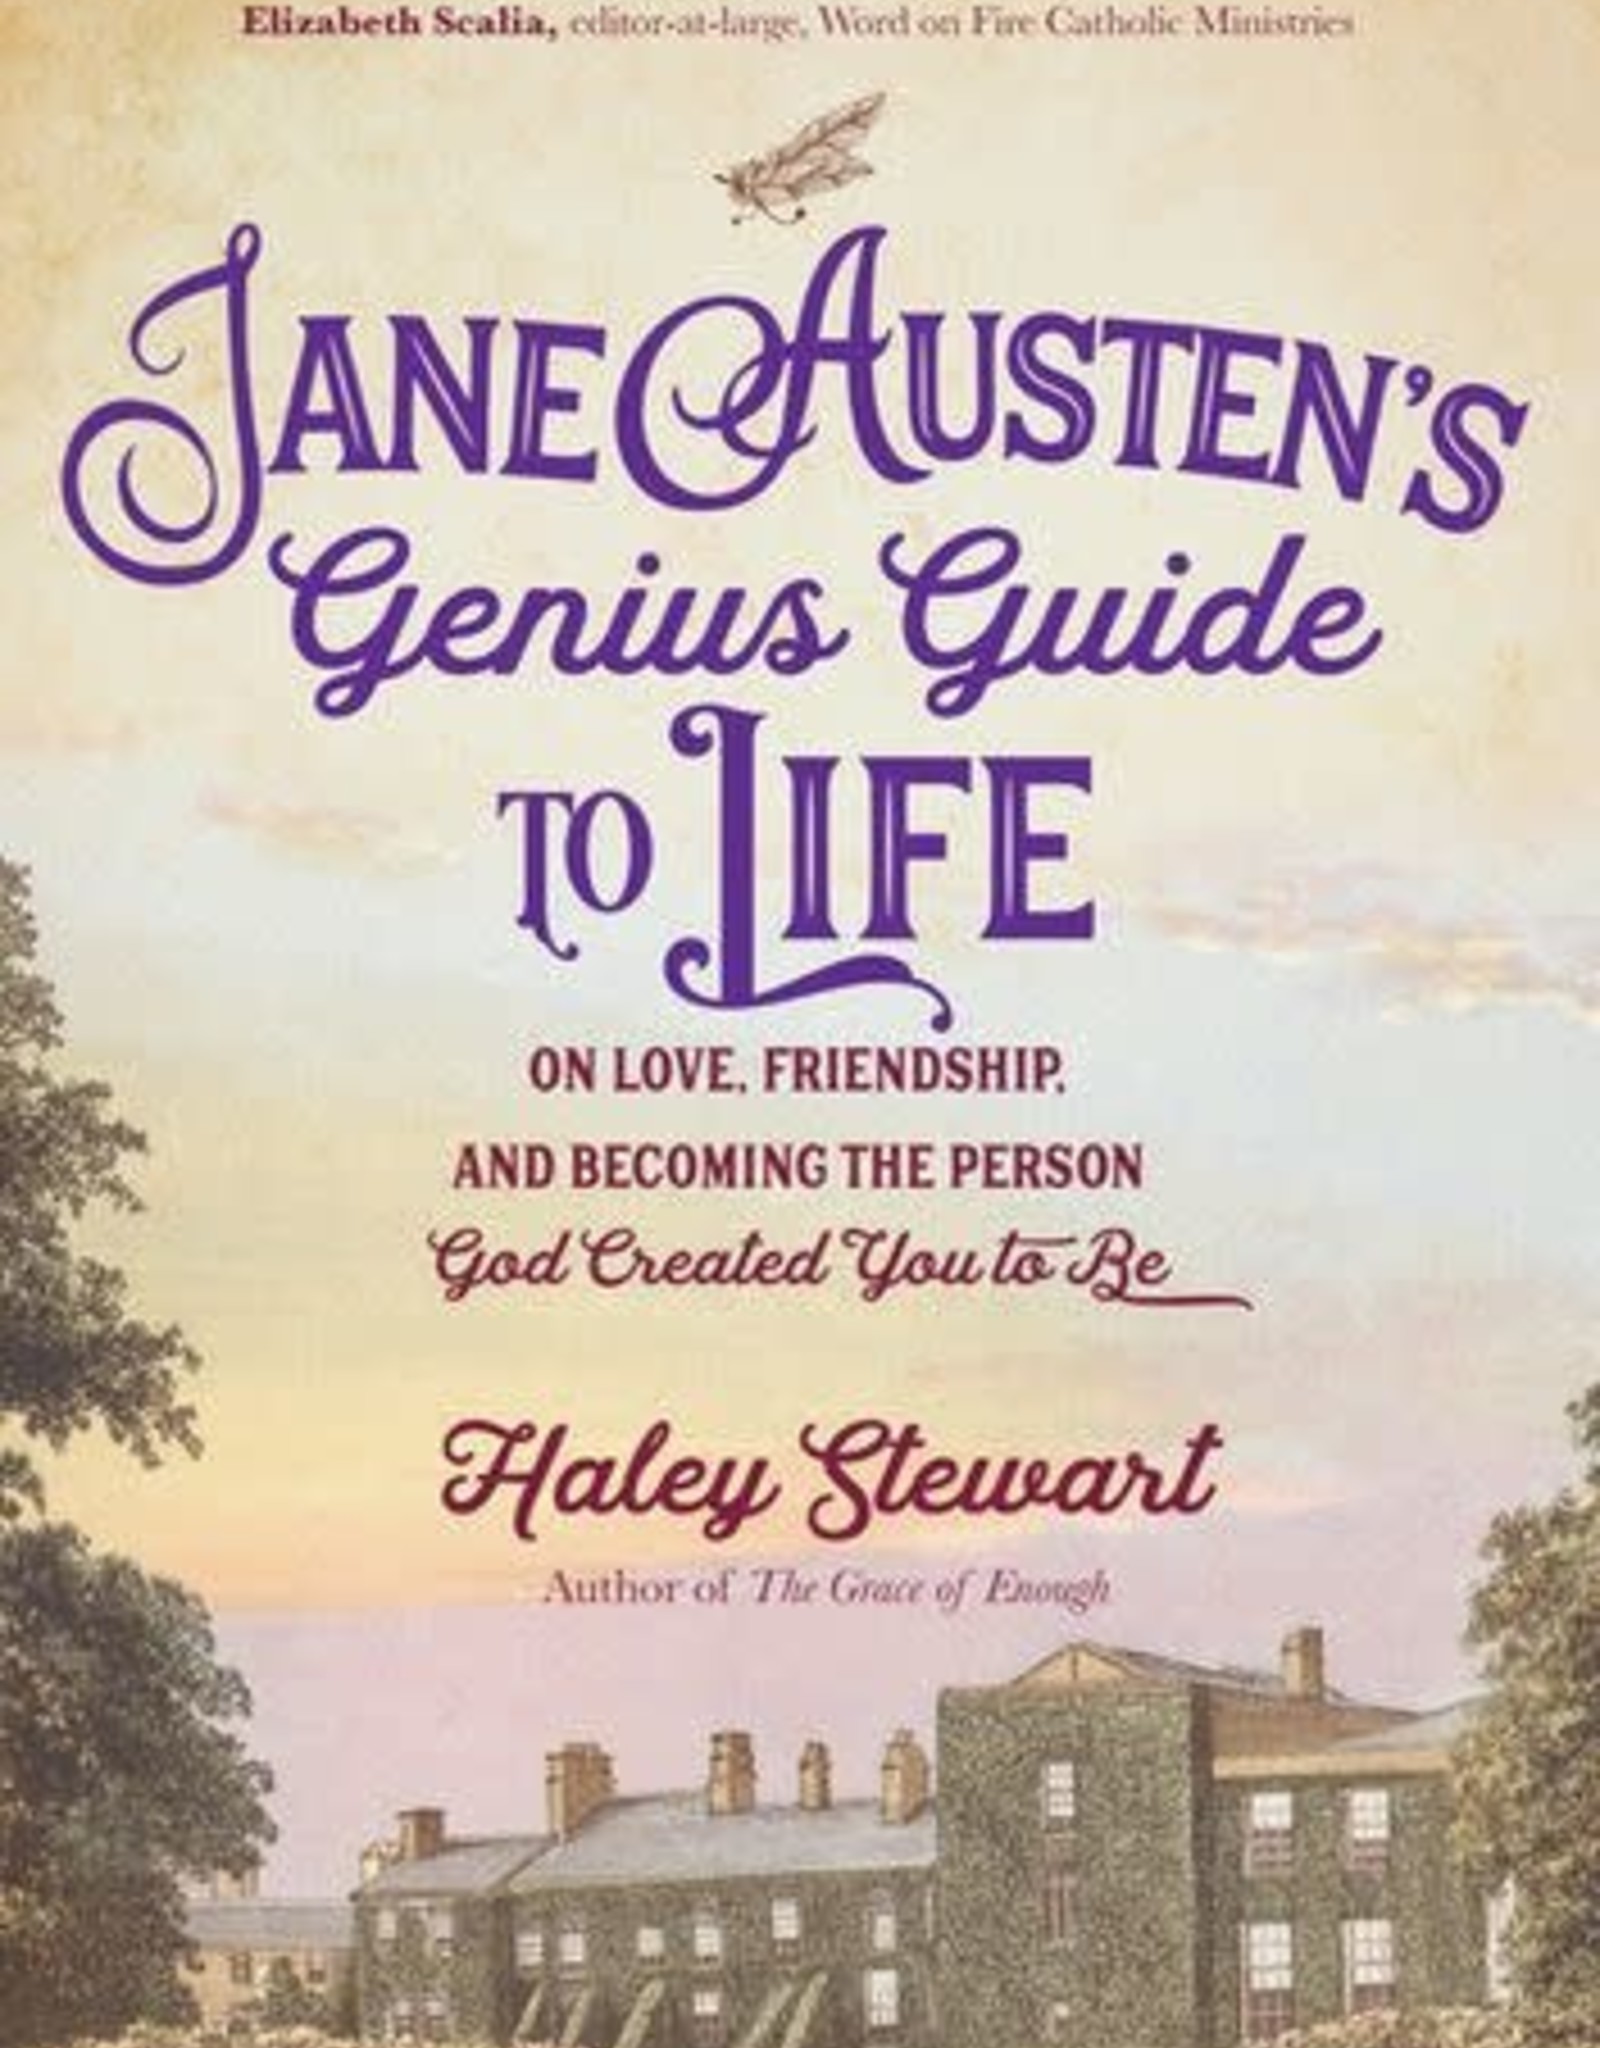 Jane Austen's Genius Guide to Life:  On Love, Friendship, and Becoming the Person God Created You to Be, by Haley Stewart (paperback)